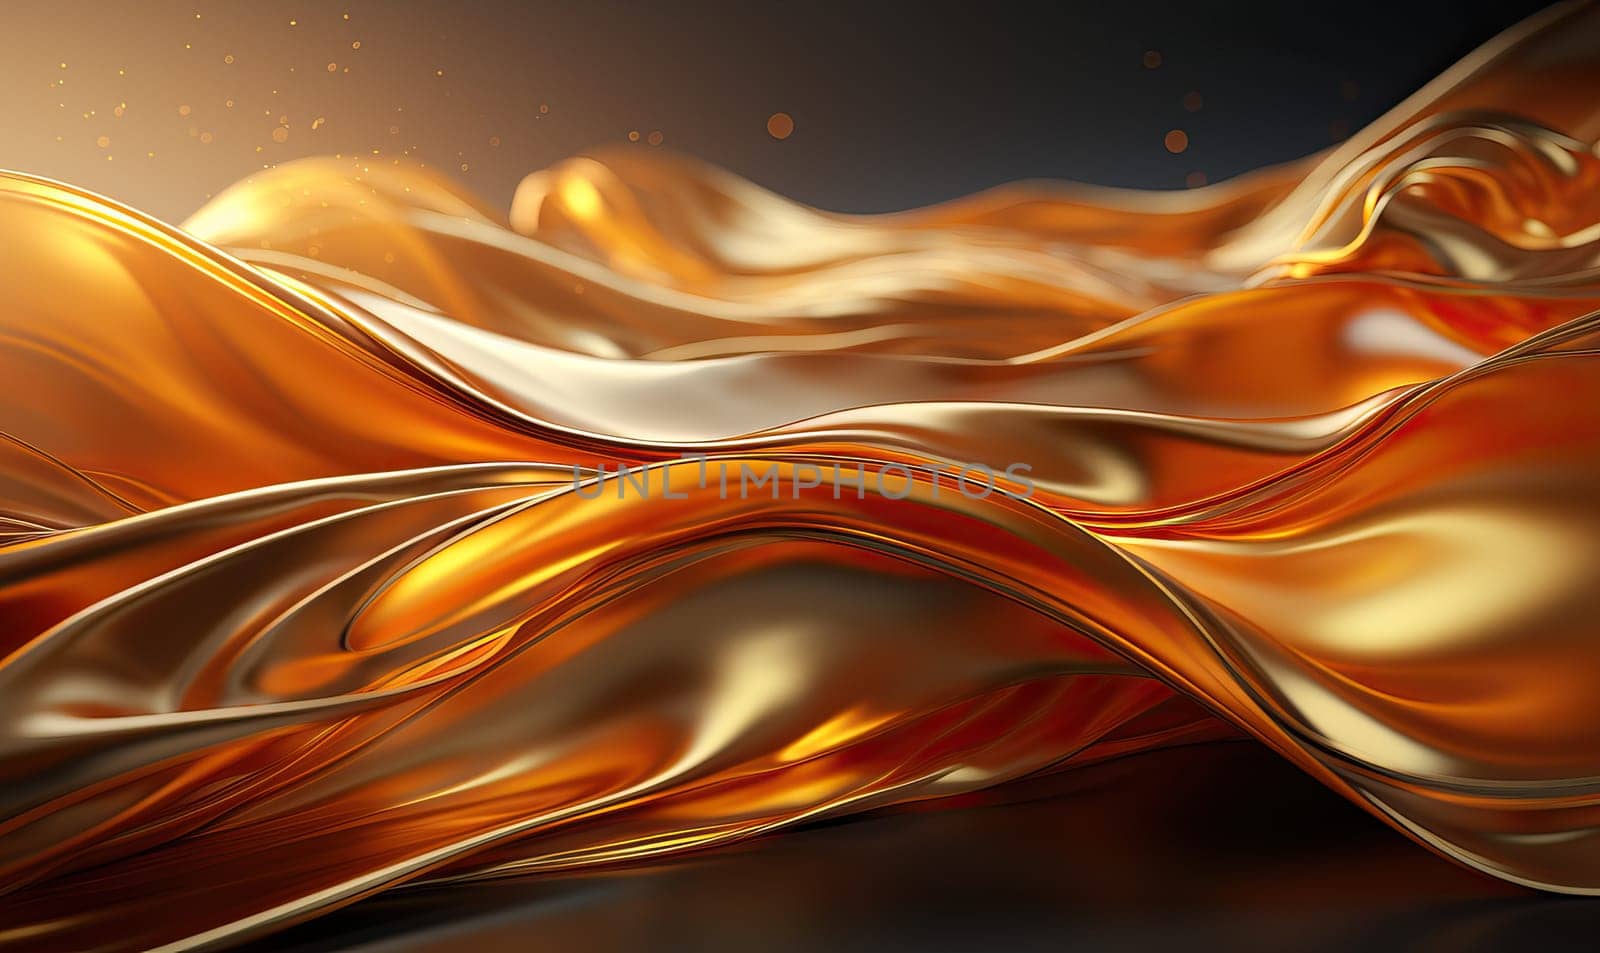 Creative of shiny elegant gold color and luxury wave elements with shiny lines on abstract background.